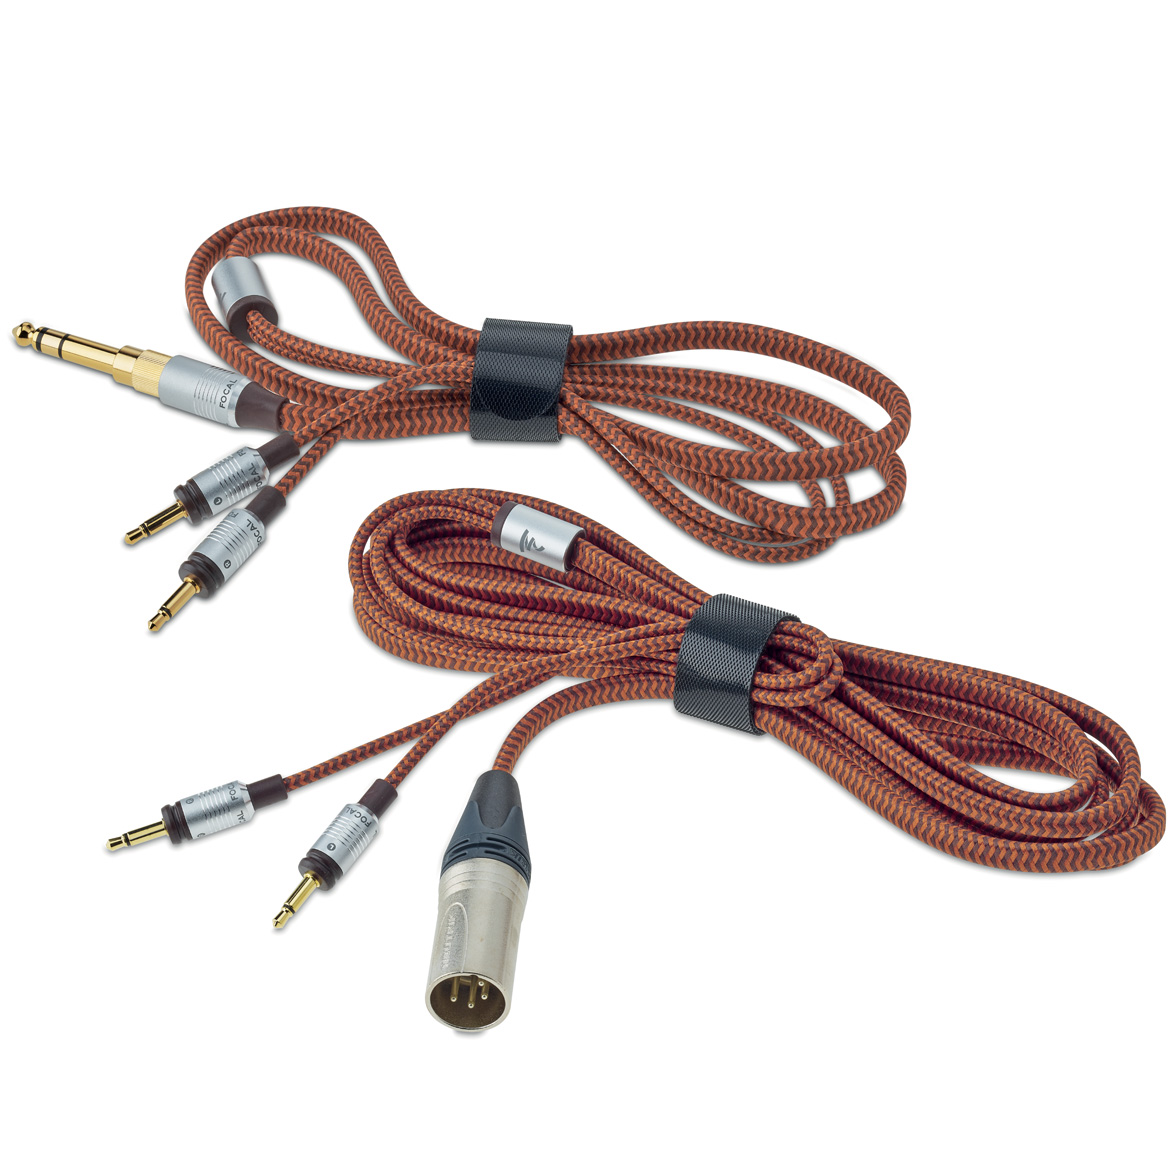 Focal Stellia cables